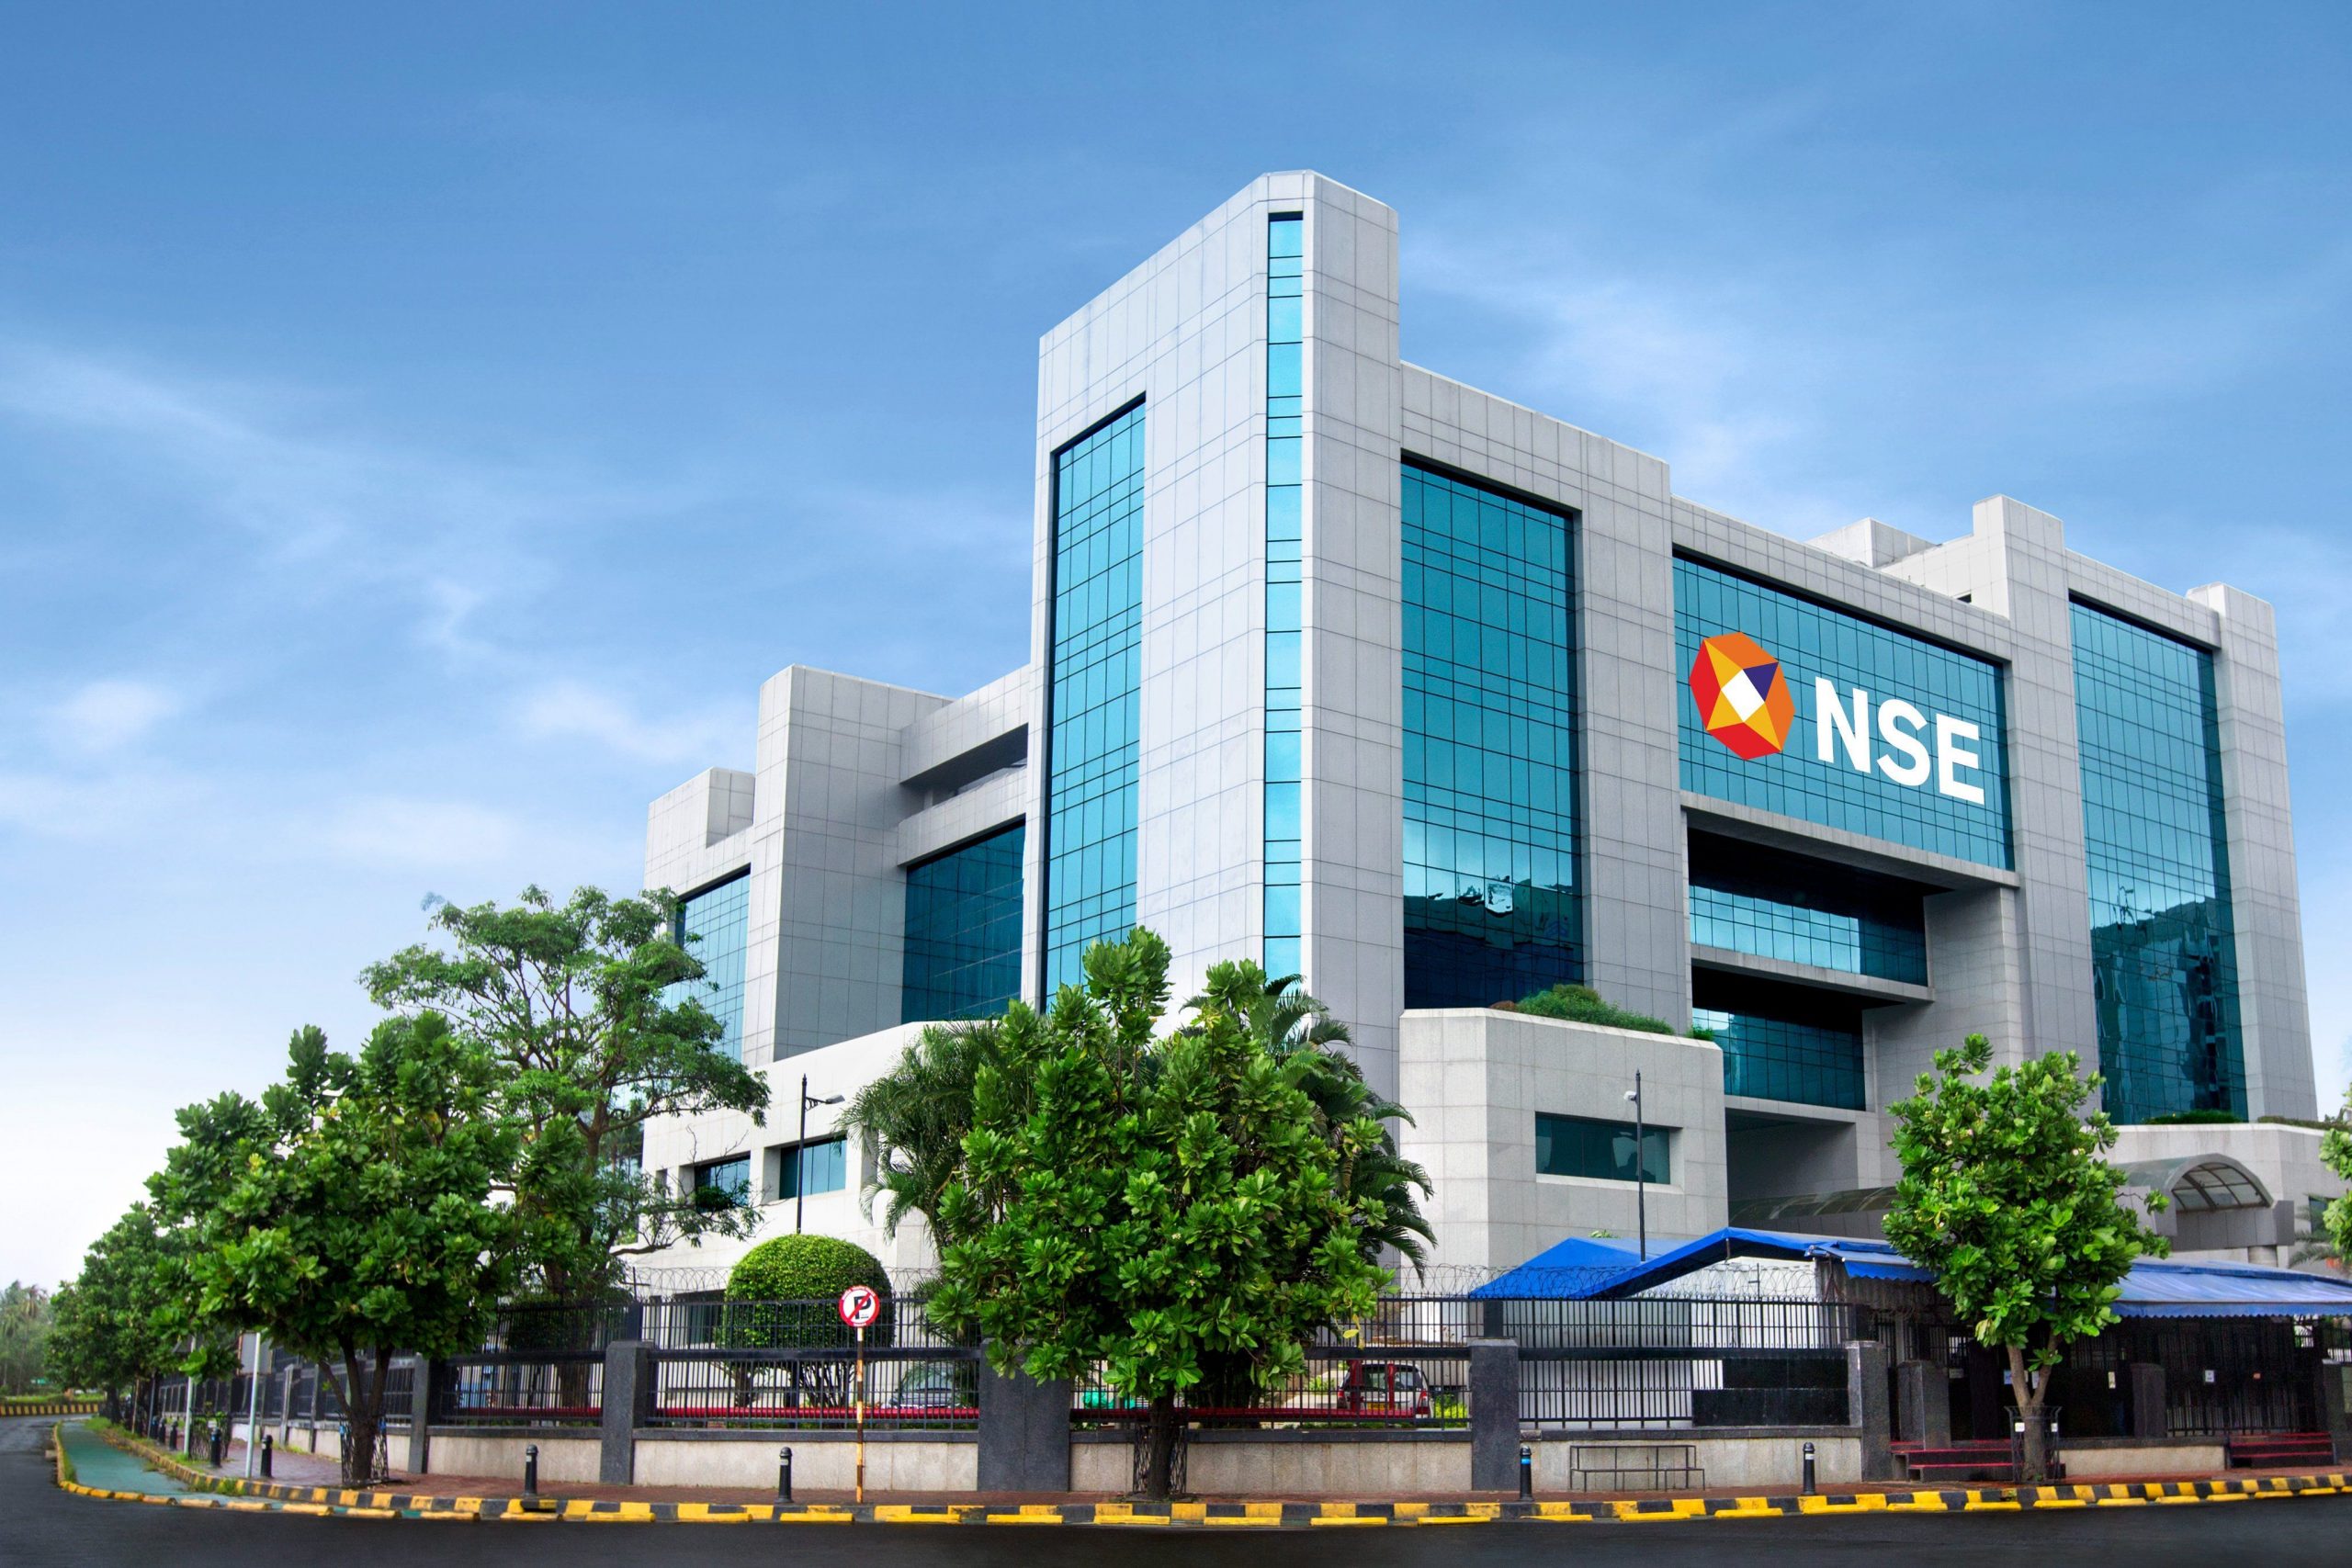 NSE F&O Ban: No stock has been put under ban on Tuesday, August 2, 2022